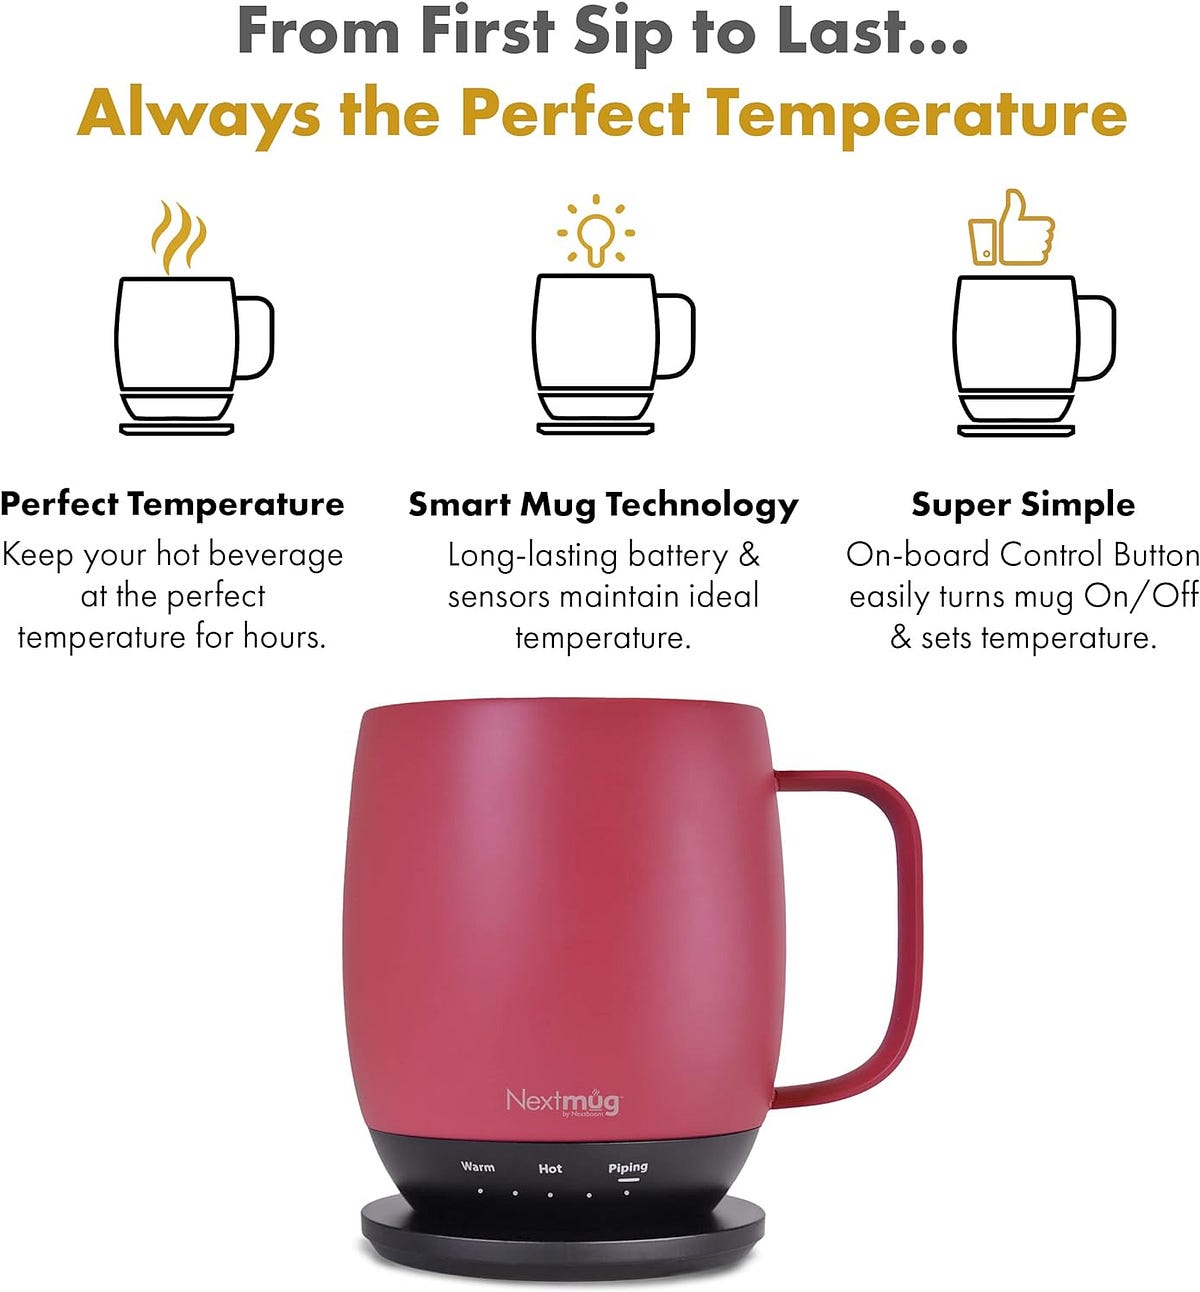 Ember introduces a larger 14oz version of its popular temperature